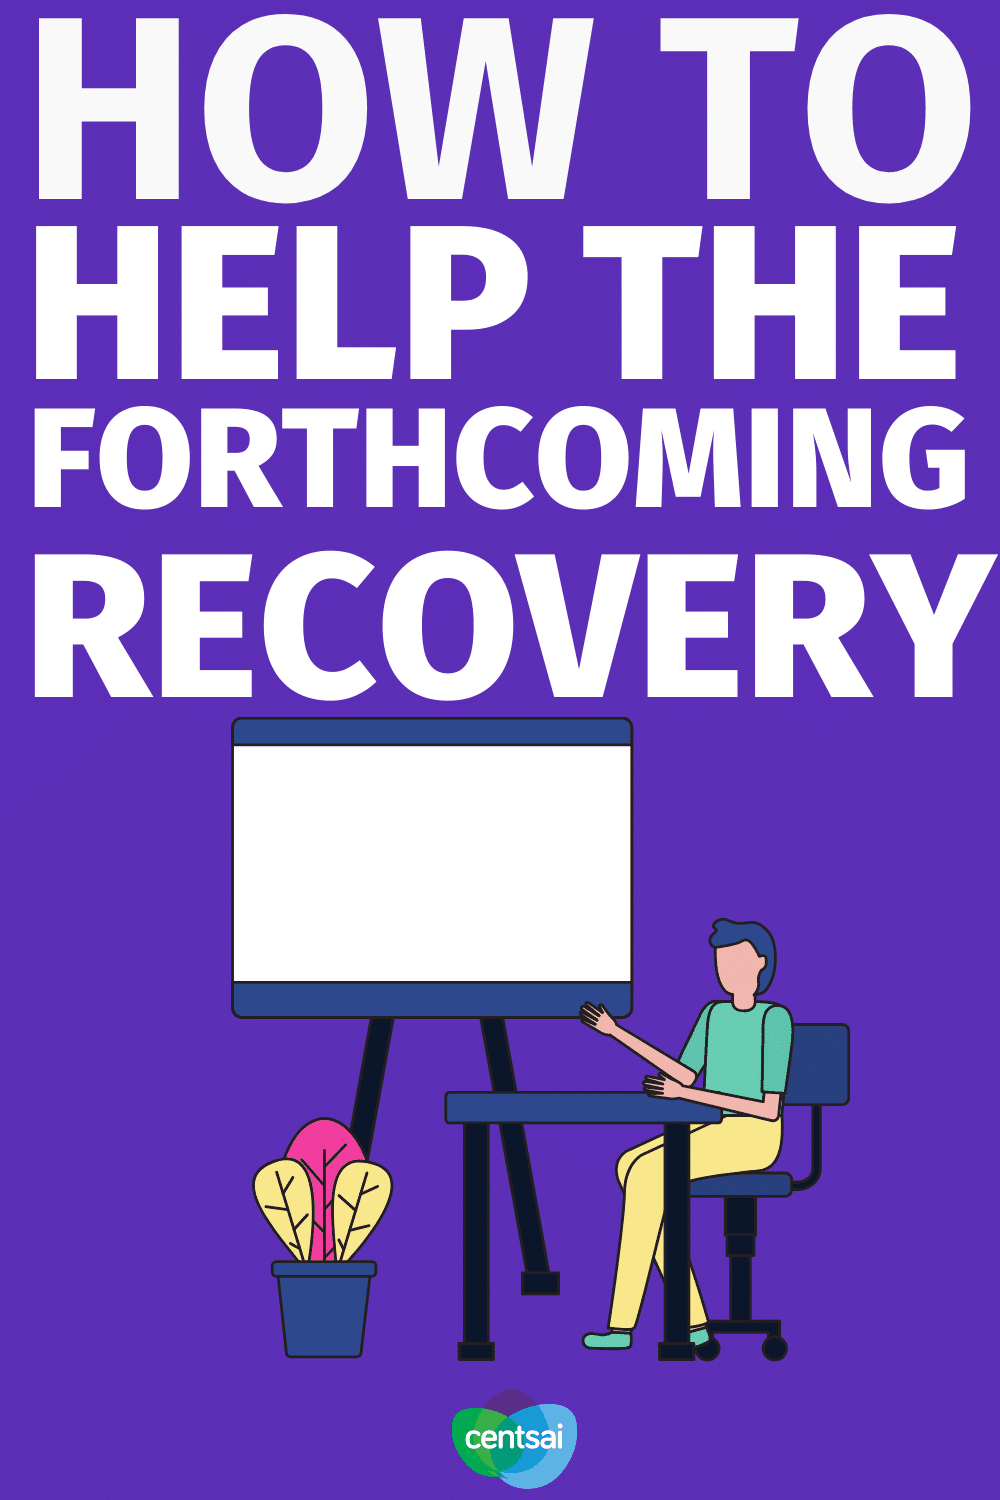 How to Help the Forthcoming Recovery